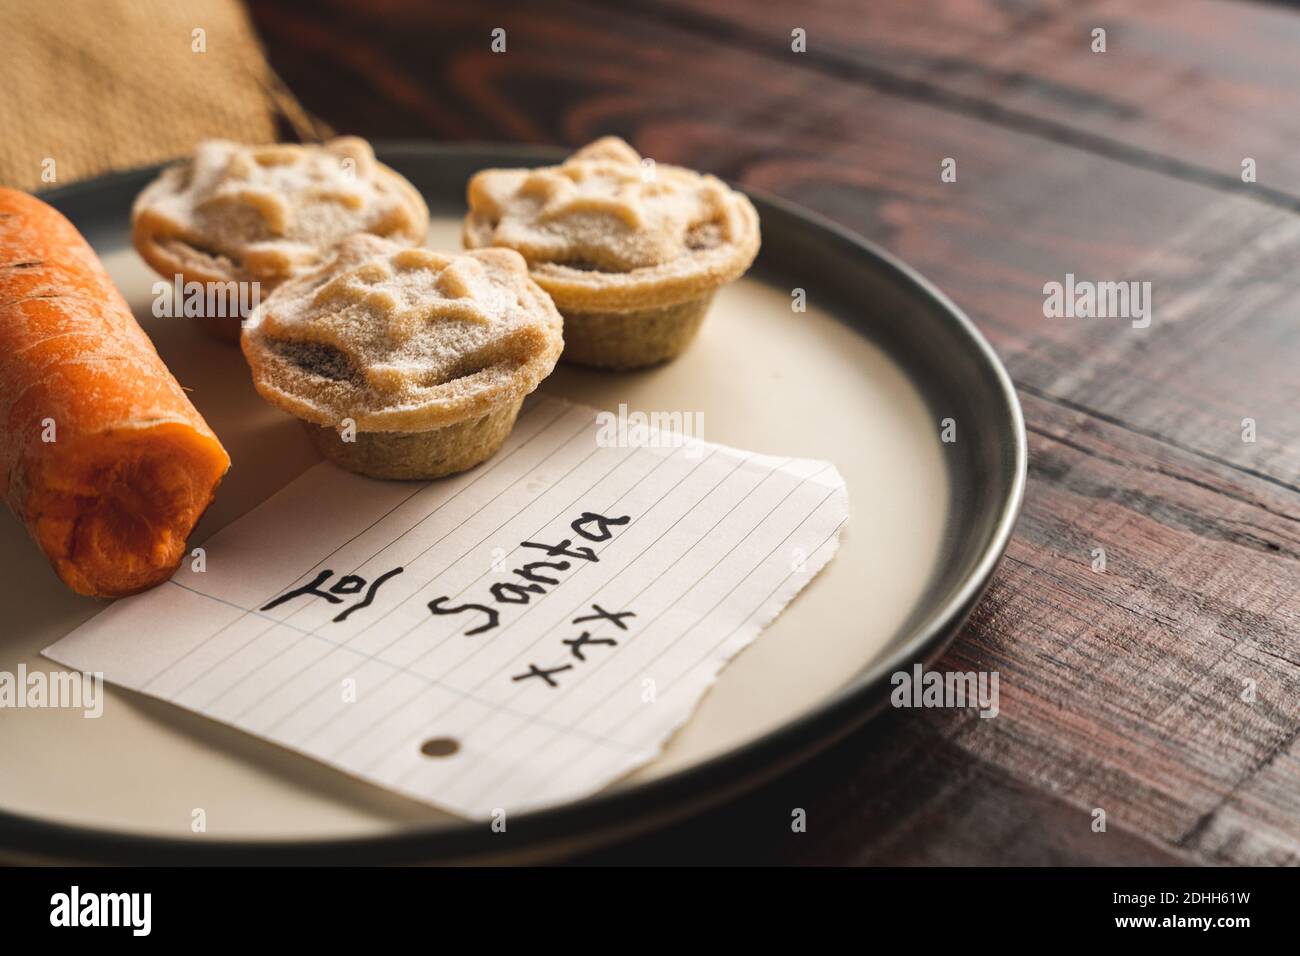 Mince pies Biscuits use for Sweets Snowman Shaped Novelty Treat Plate